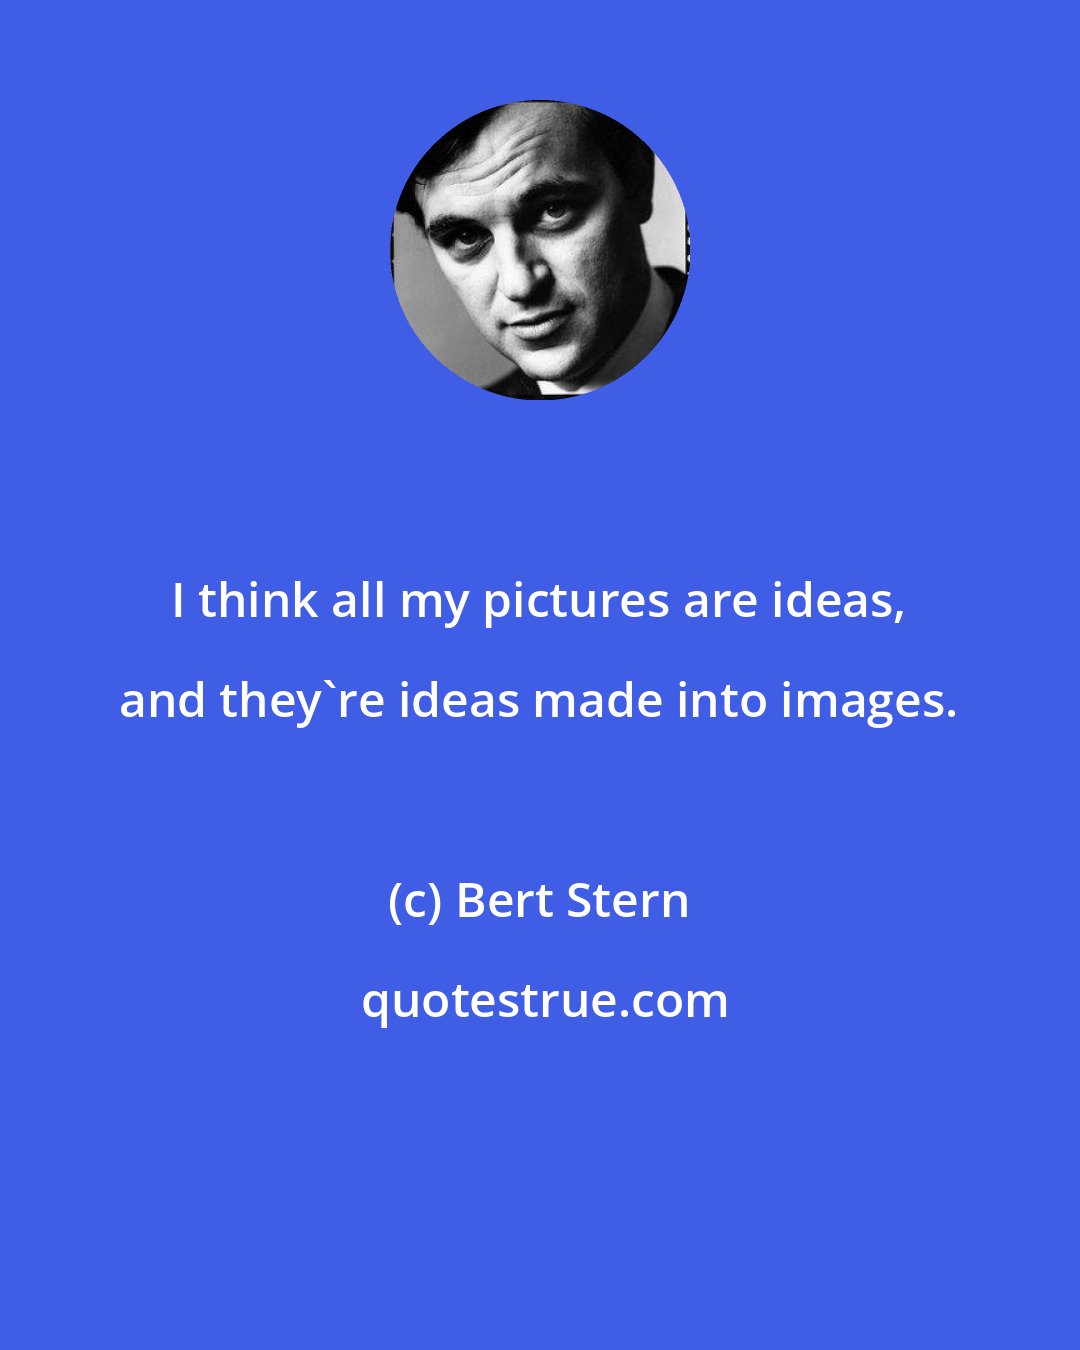 Bert Stern: I think all my pictures are ideas, and they're ideas made into images.